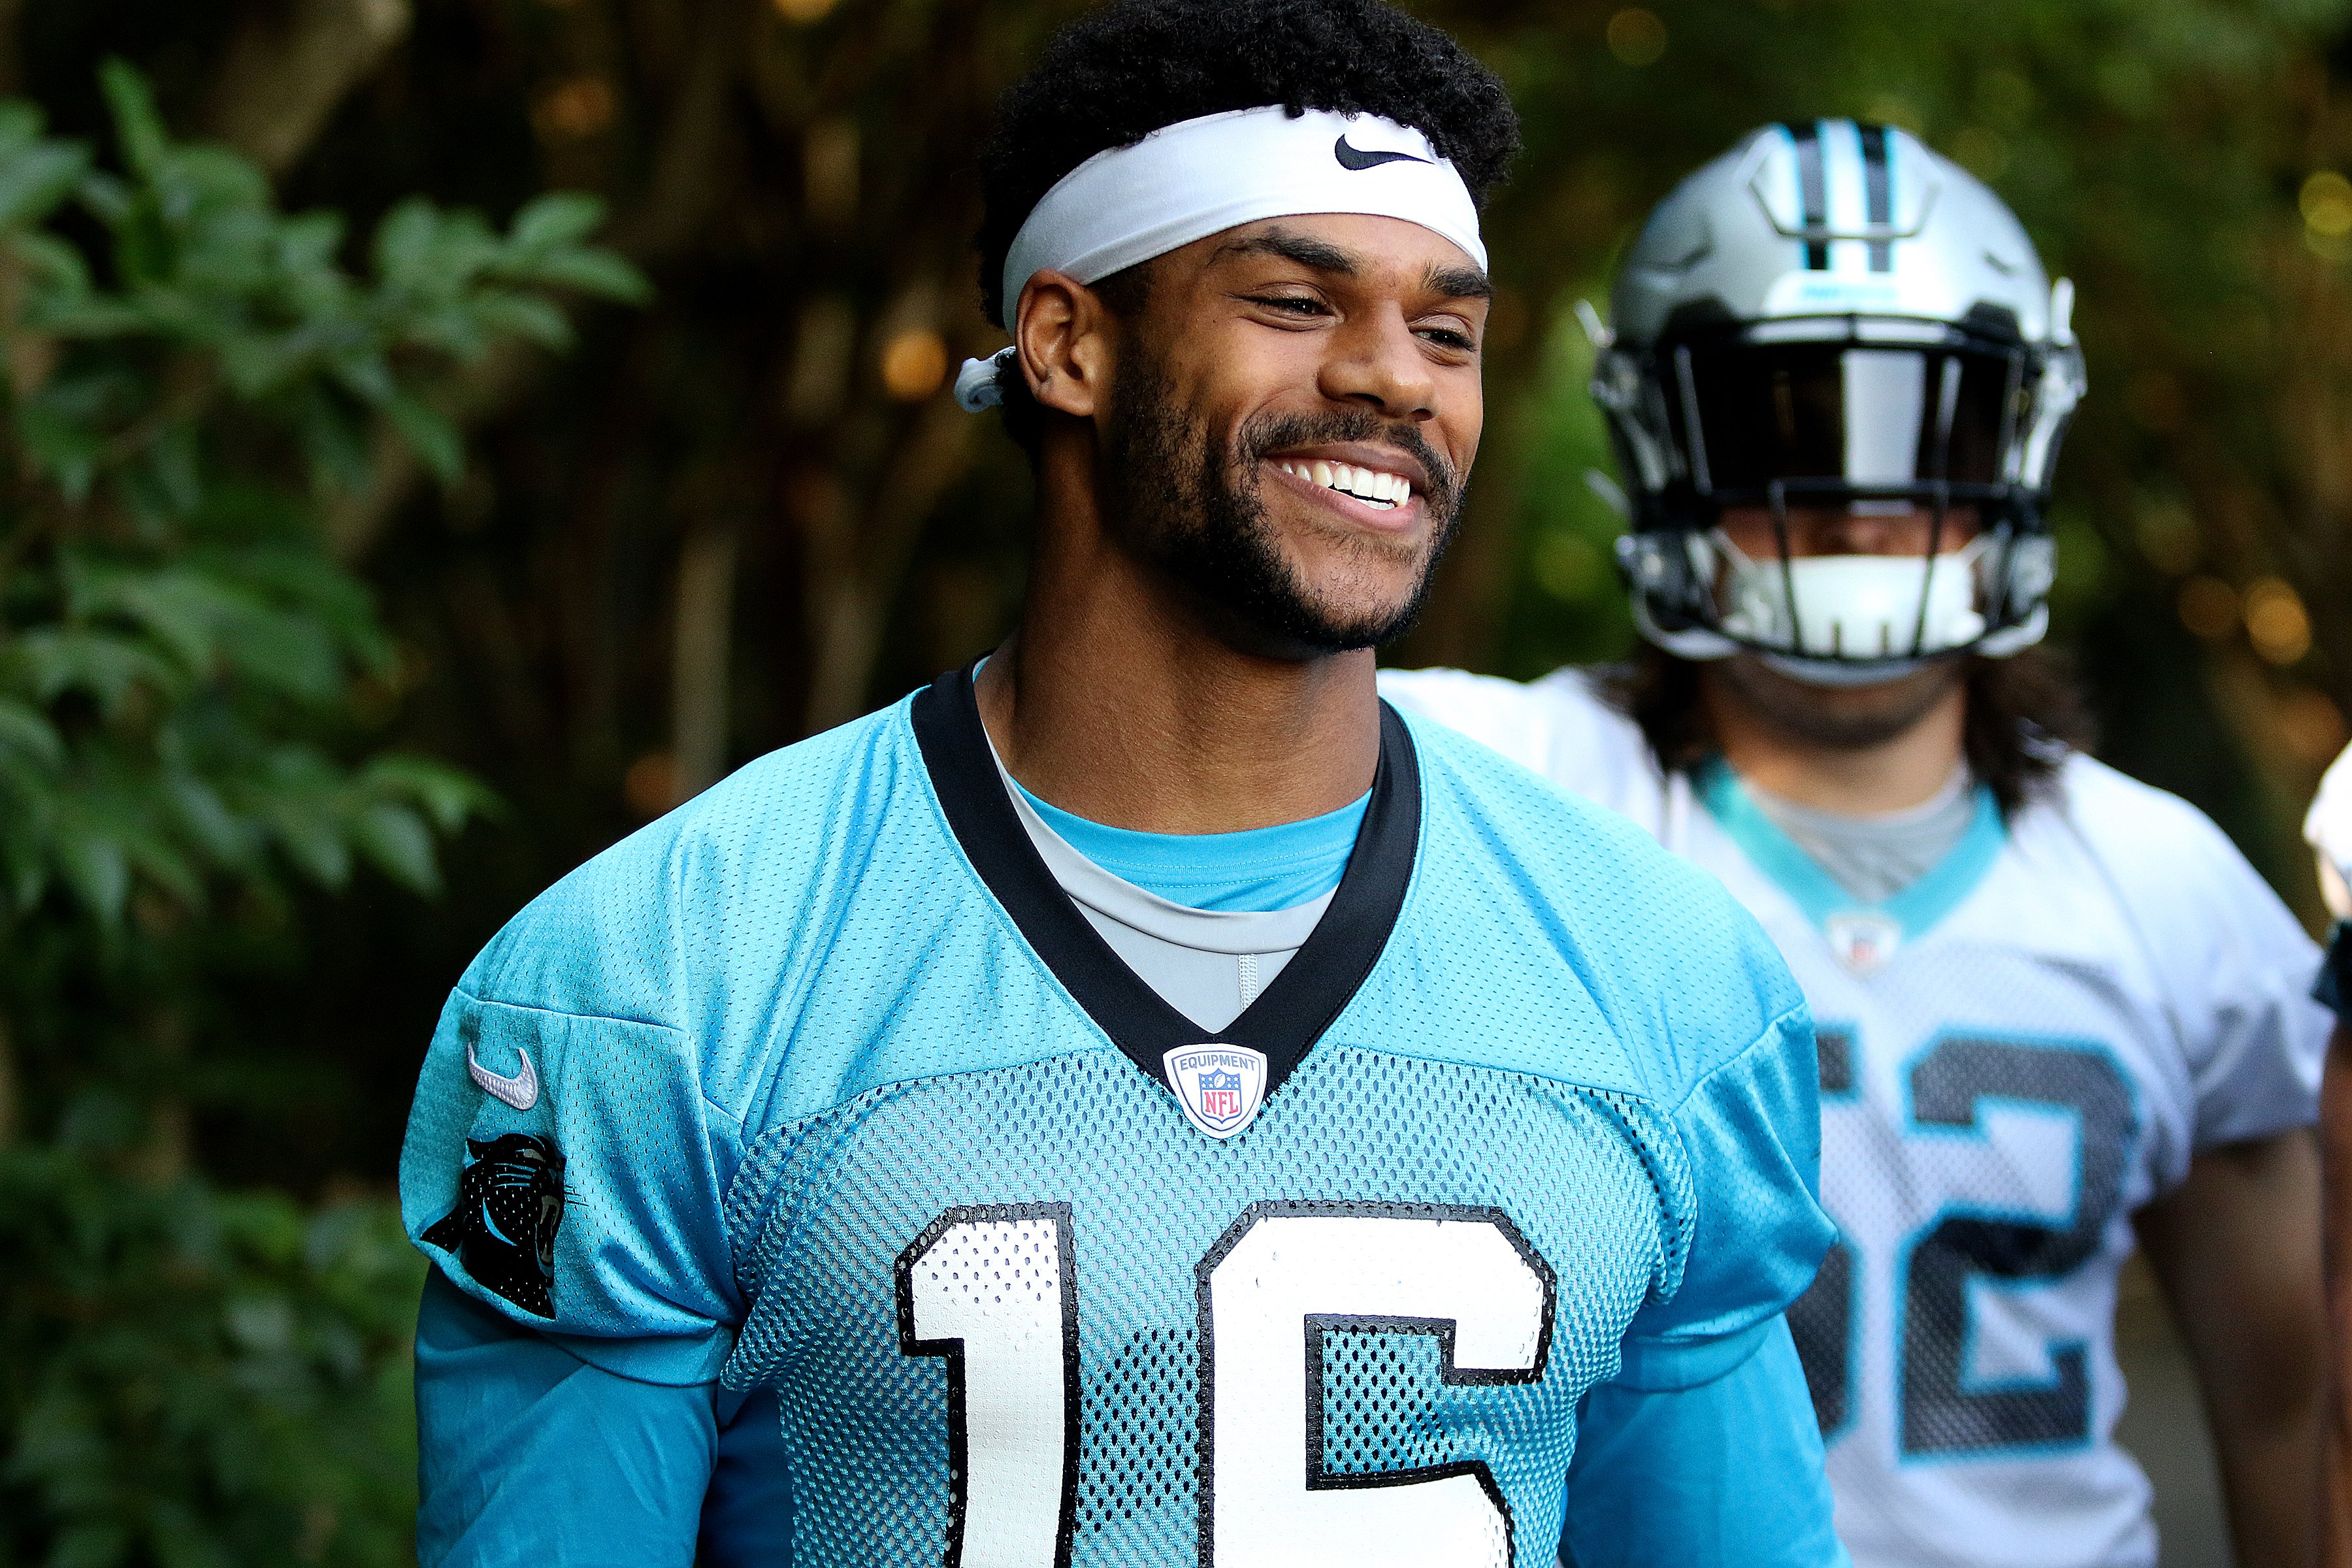 Andre Levrone wide receiver of Carolina during an OTA practice at the Carolina Panthers training facility in Charlotte, N.C. on May 28, 2019. | Source: Getty Images